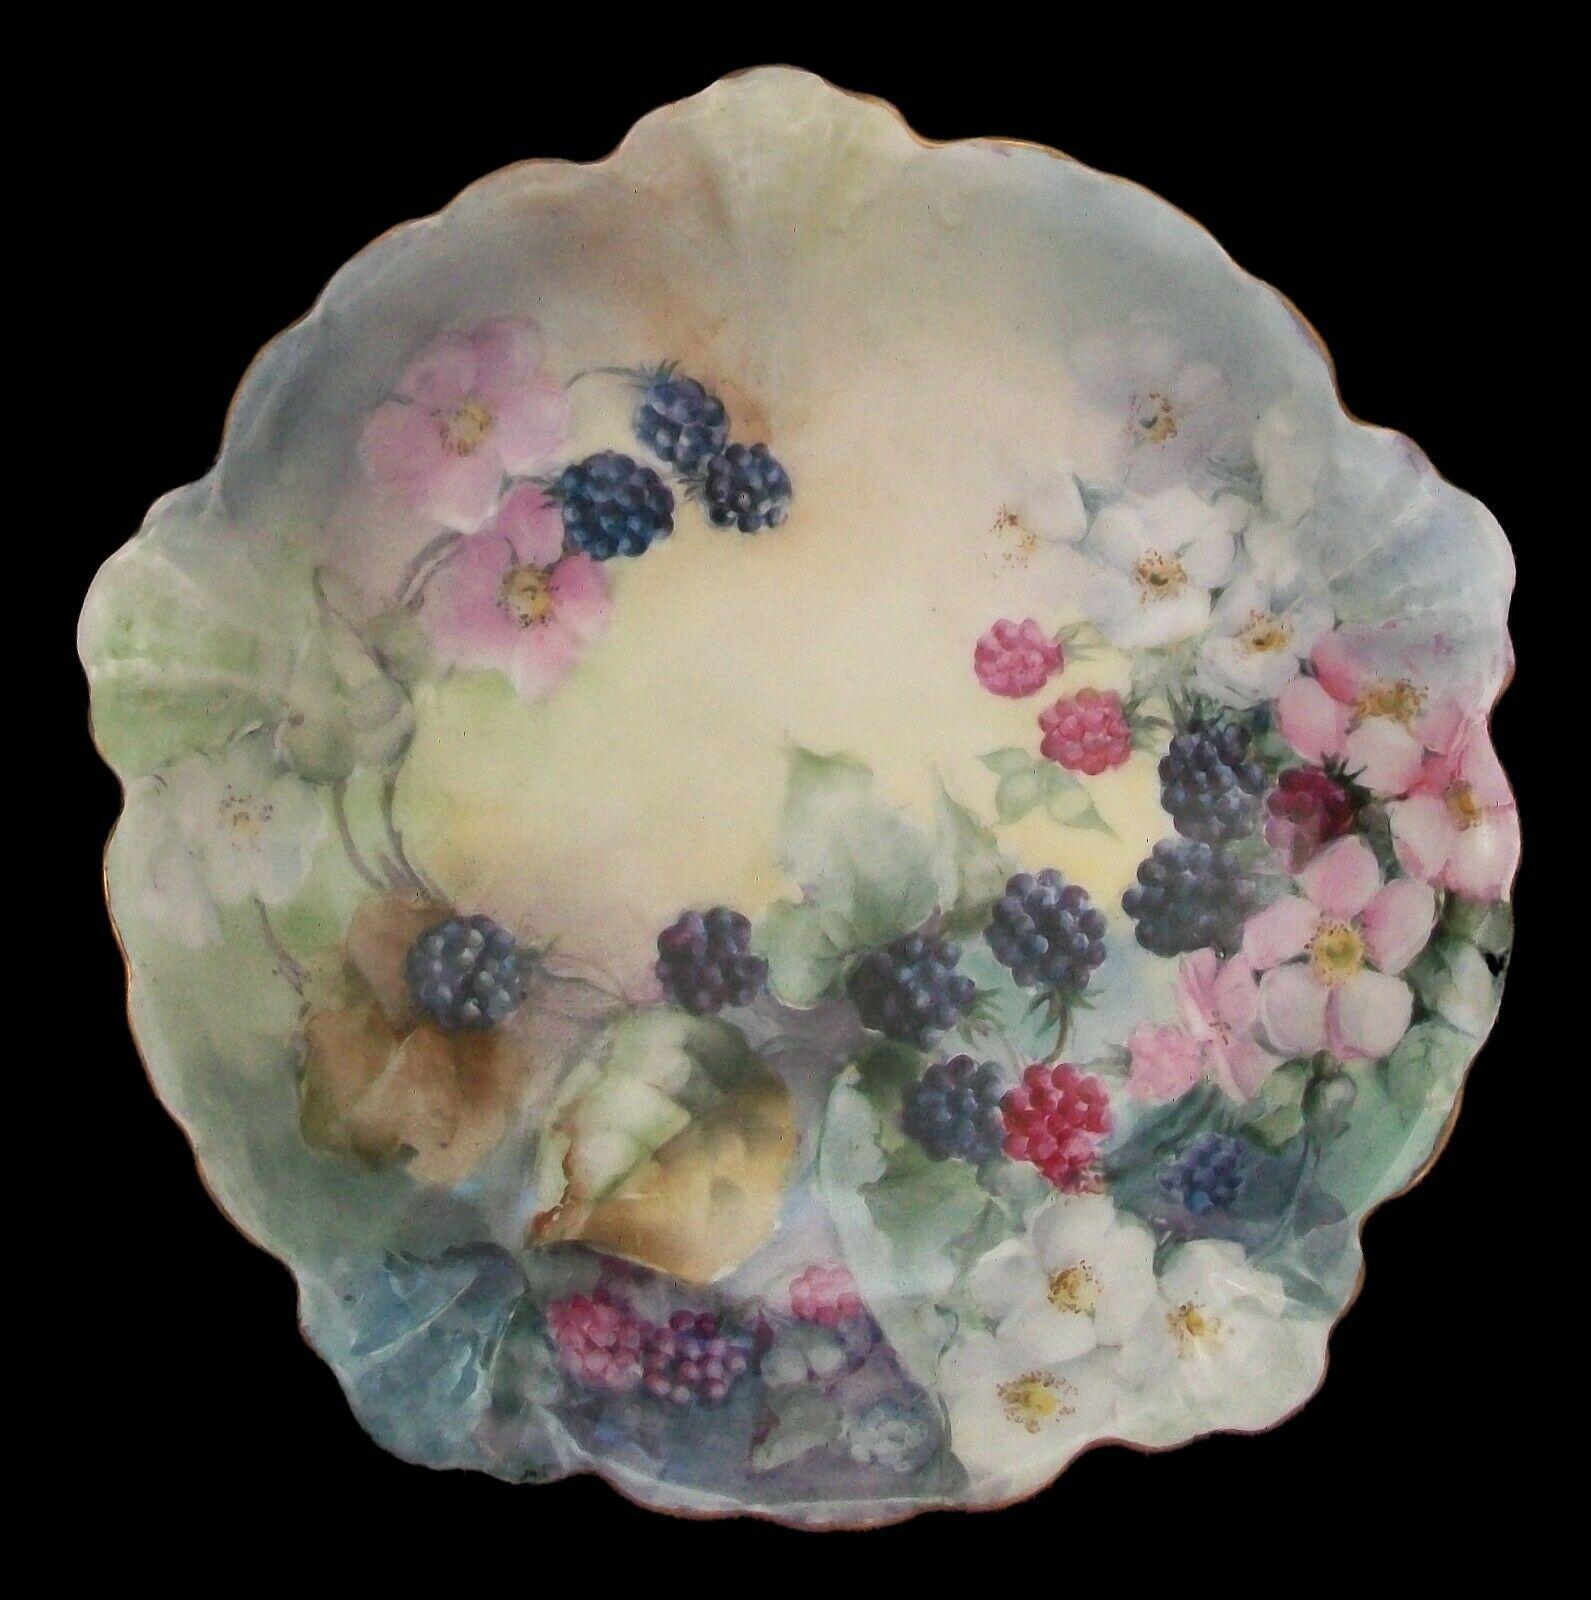 Hortense Mattice Gordon R.C.A. (Canadian 1887-1961) - Fine and rare antique ceramic cabinet bowl - hand painted in the Art Nouveau style on an imported blank - featuring a display of raspberries and blackberries with flowers and leaves - gilded edge